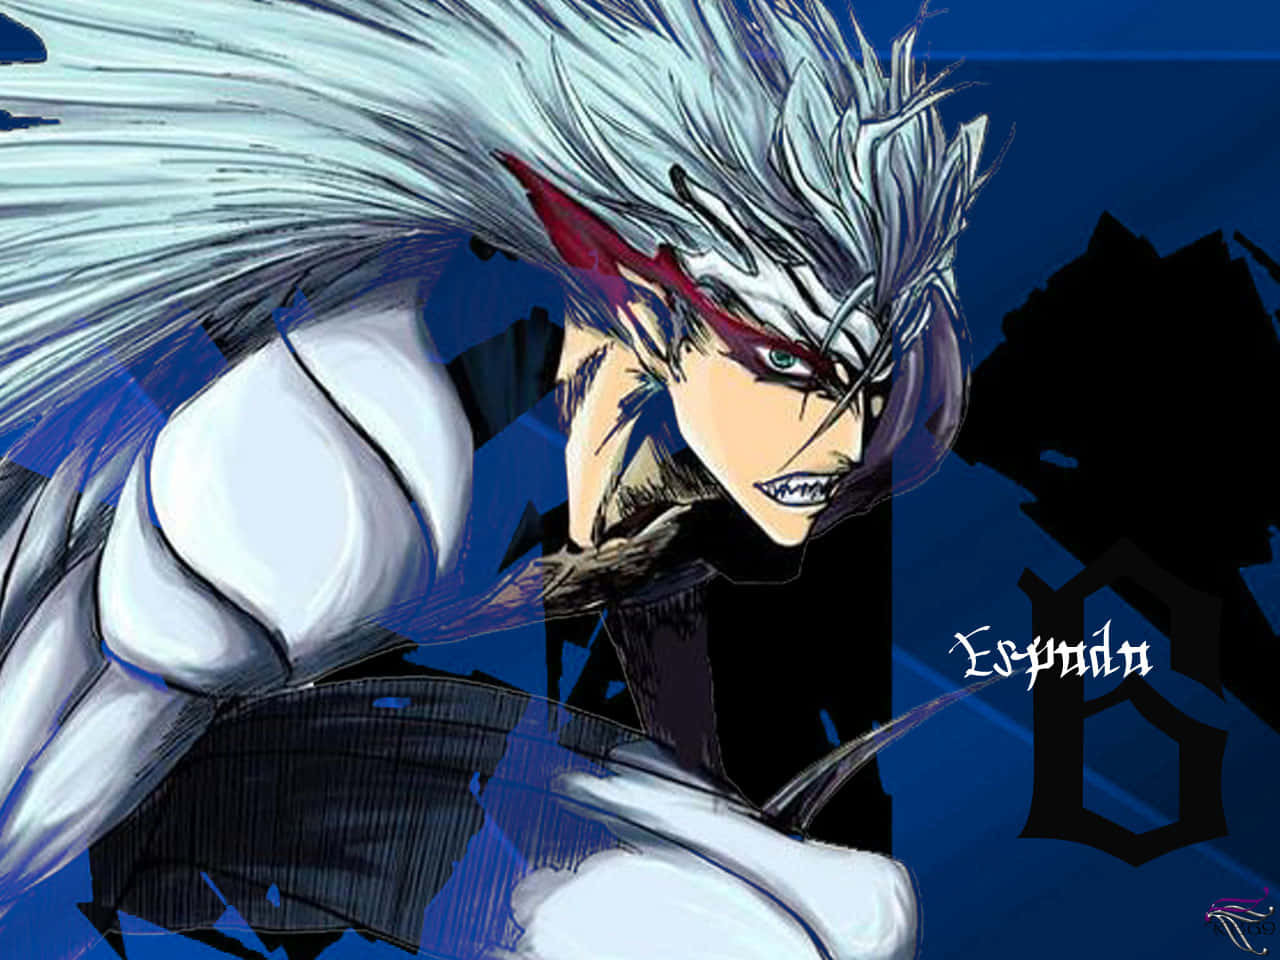 Grimmjow Jaegerjaquez from the anime series Bleach. Wallpaper